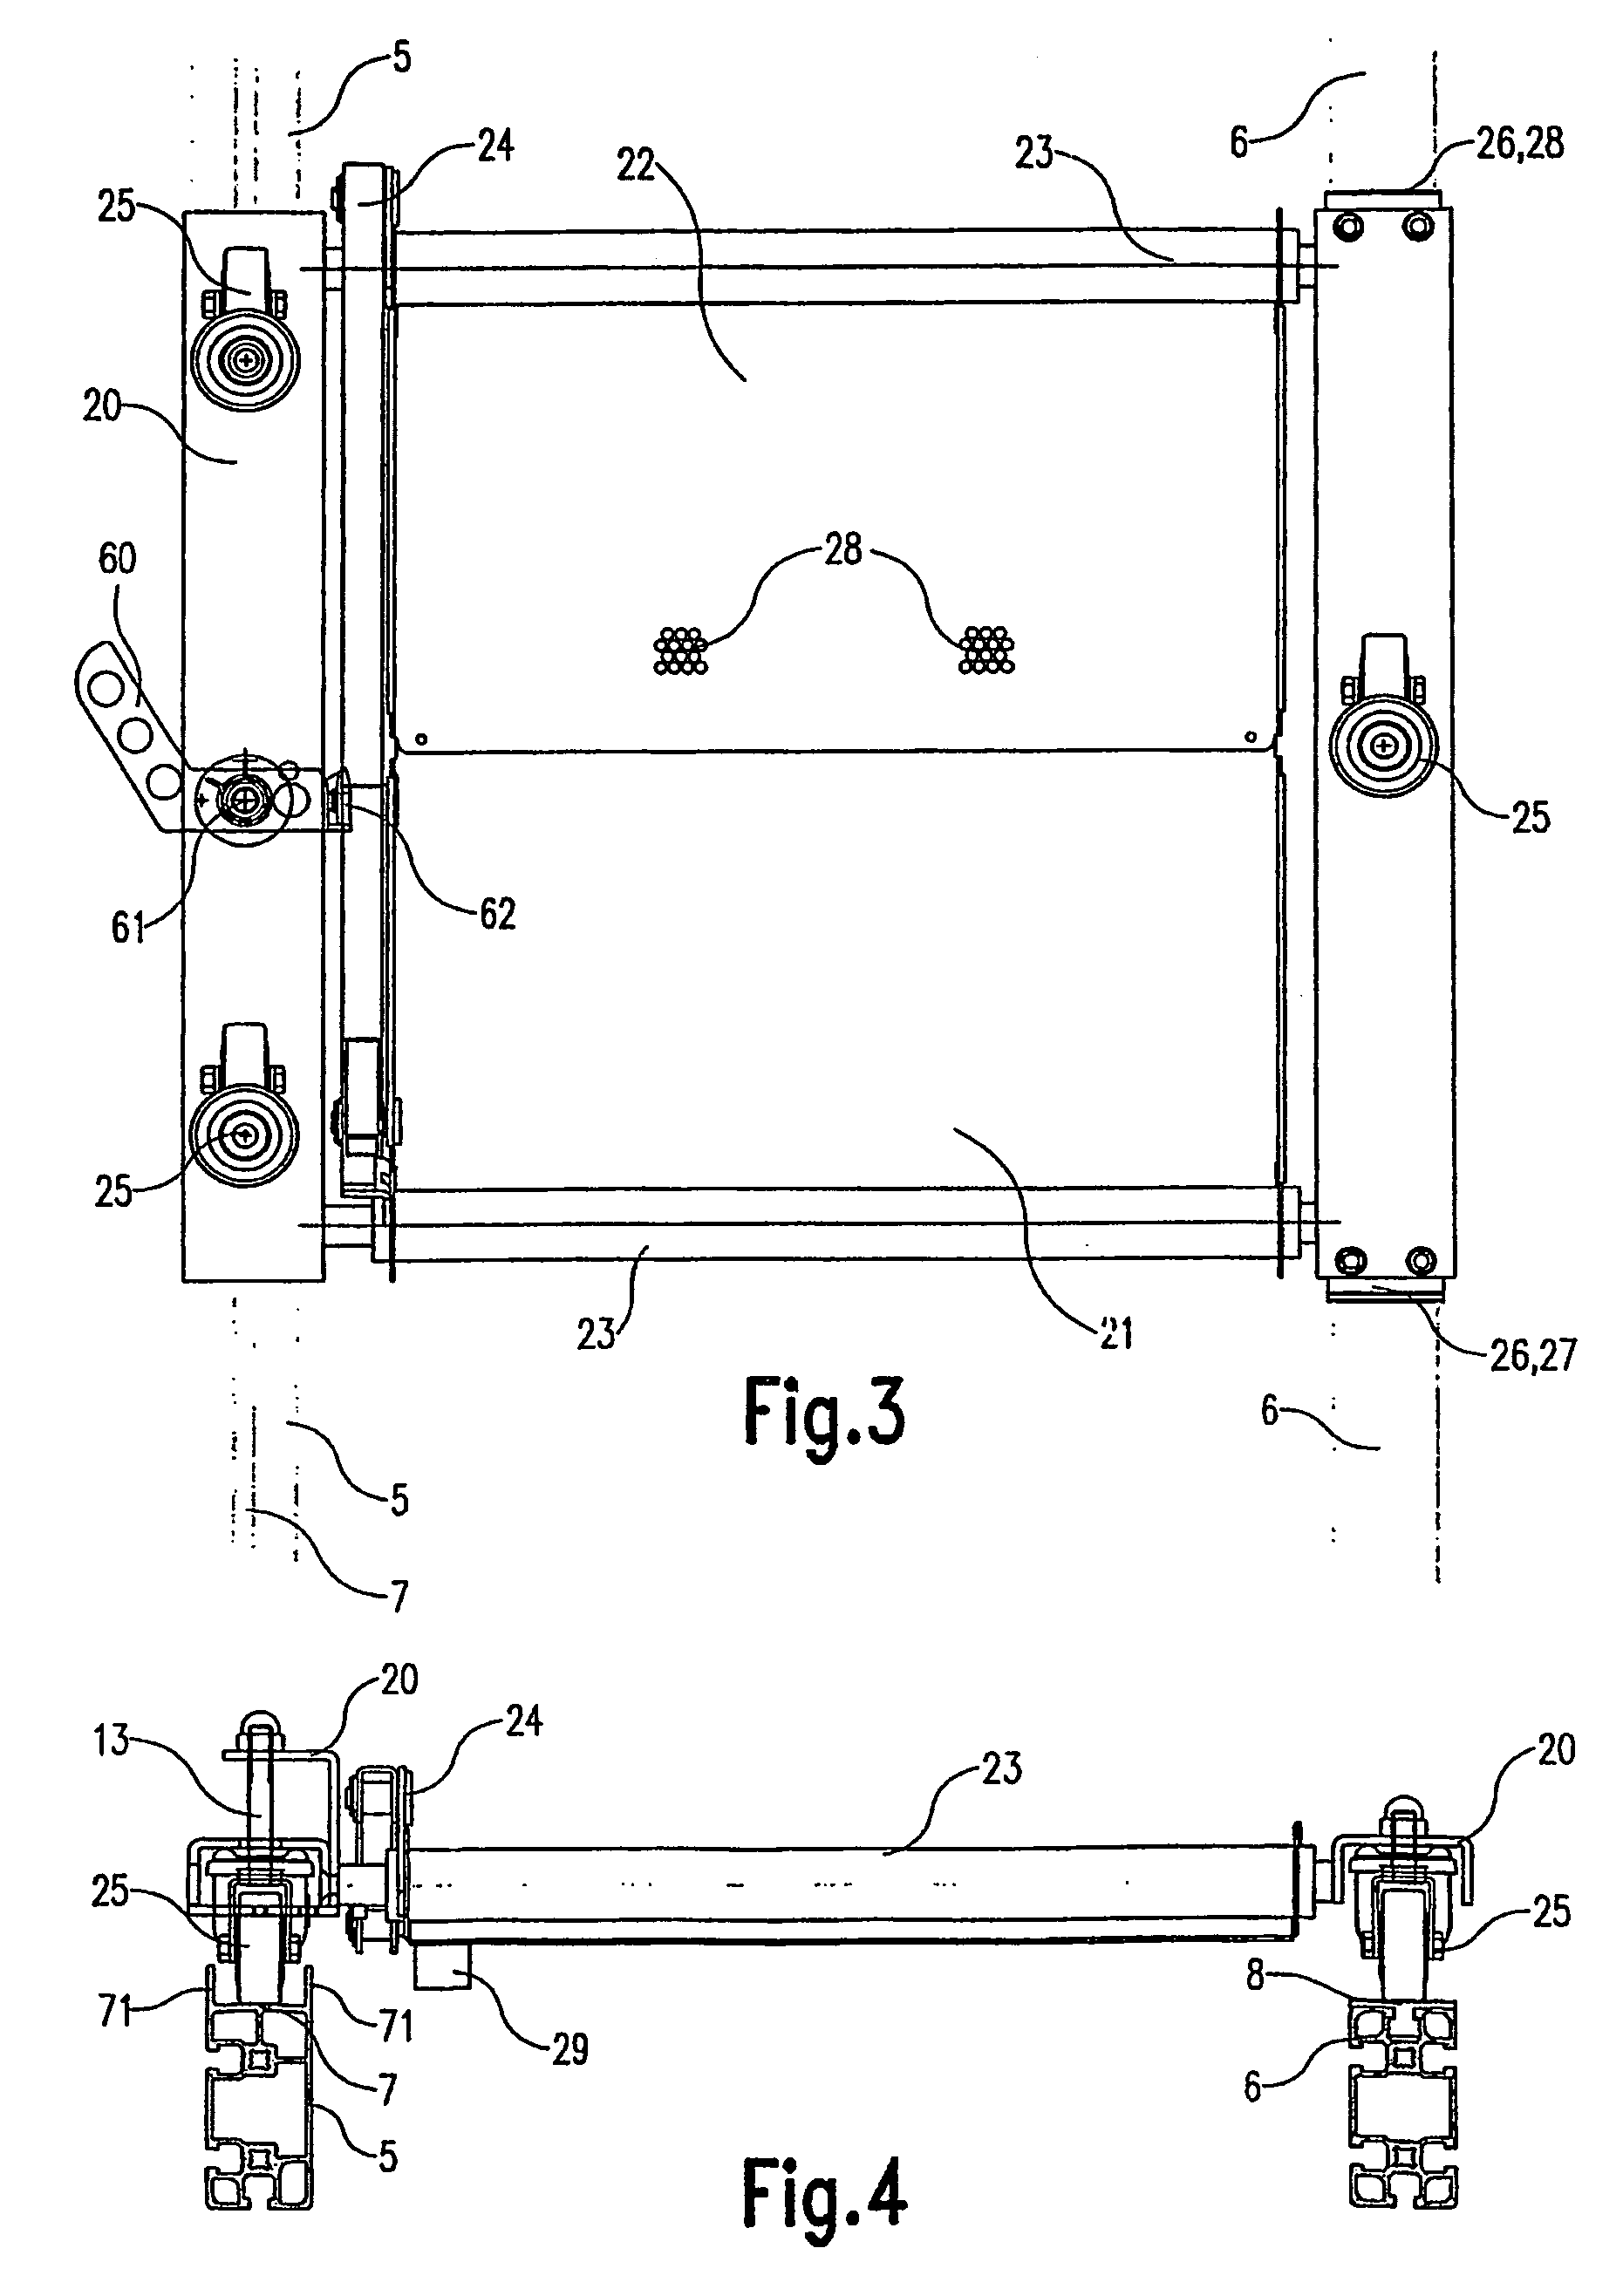 Apparatus and transport container for transport and controller discharge of a load